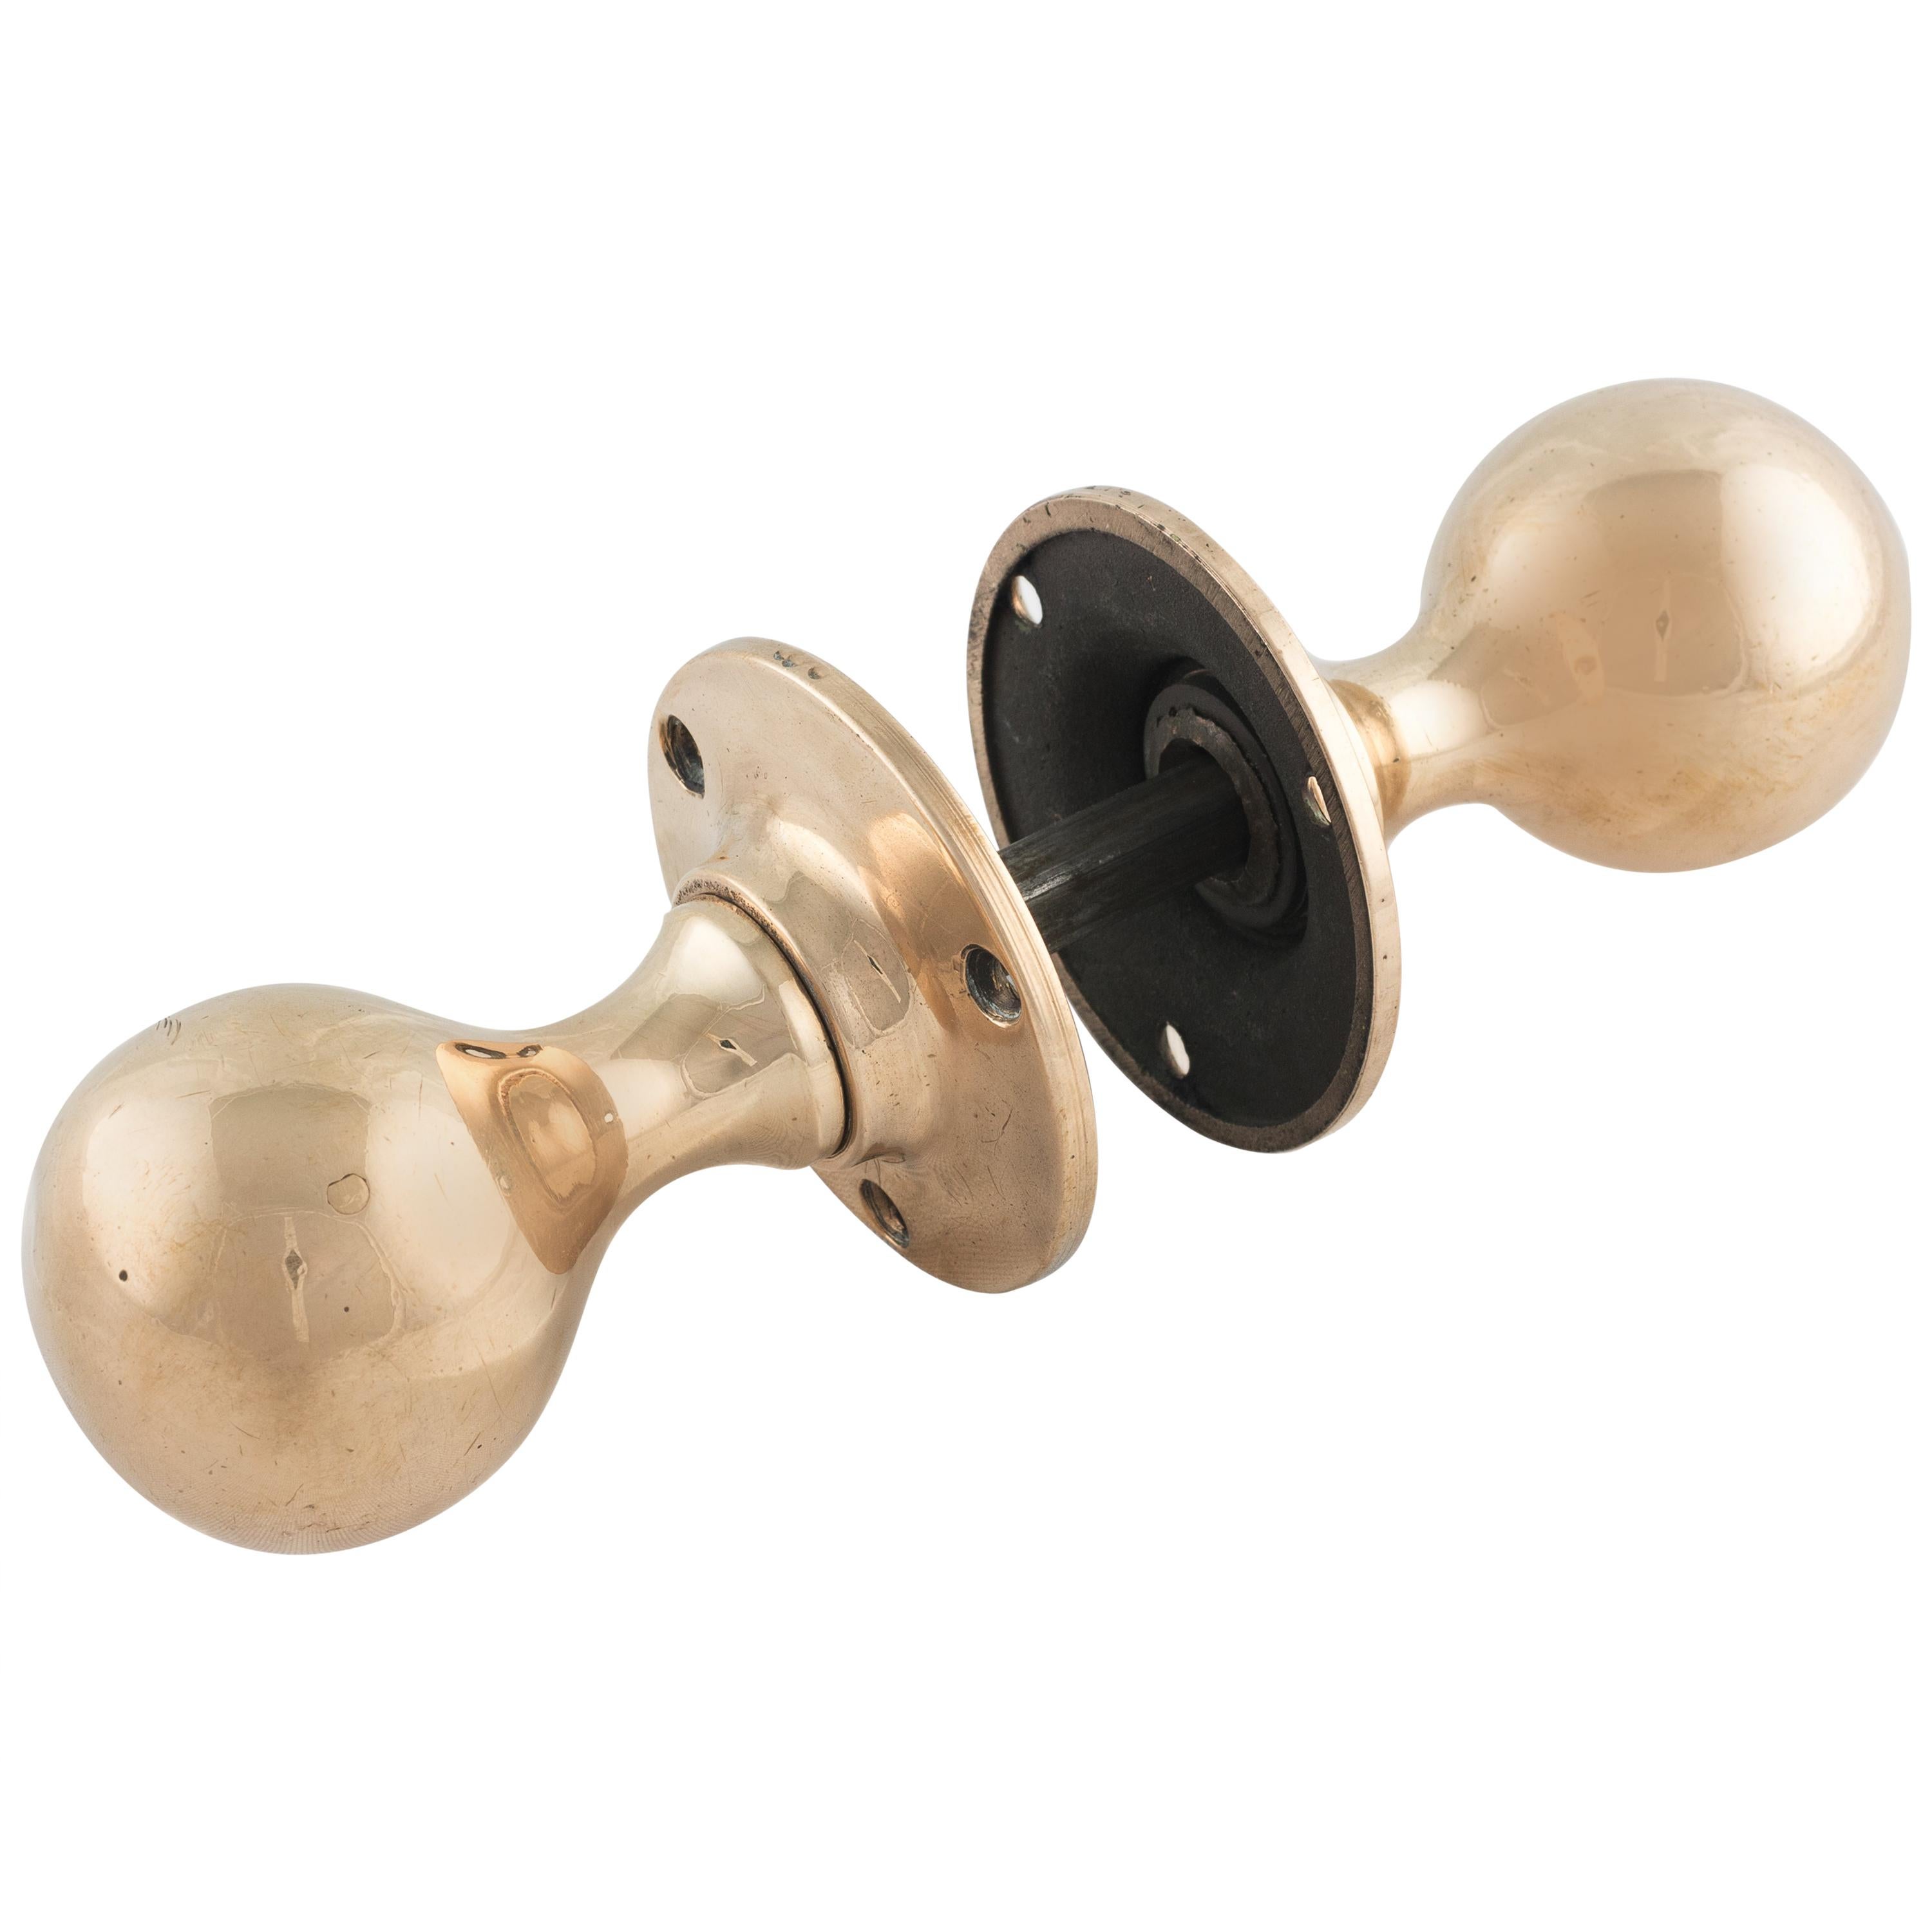 Early 20th Century English Rose Brass Door Knobs